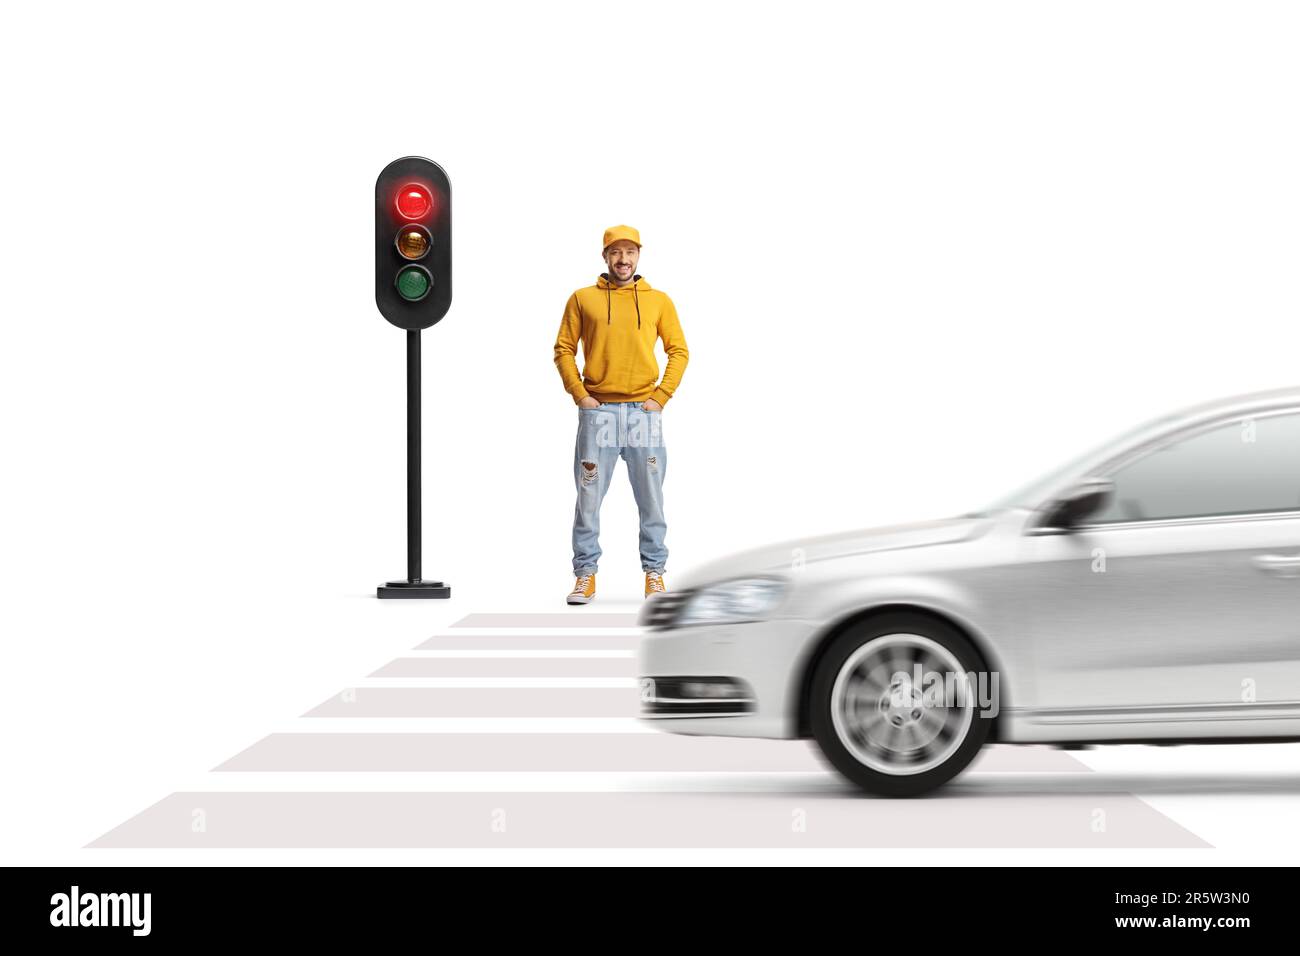 Full length portrait of a young man waiting for a green light at pedestrian crosswalk isolated on white background Stock Photo